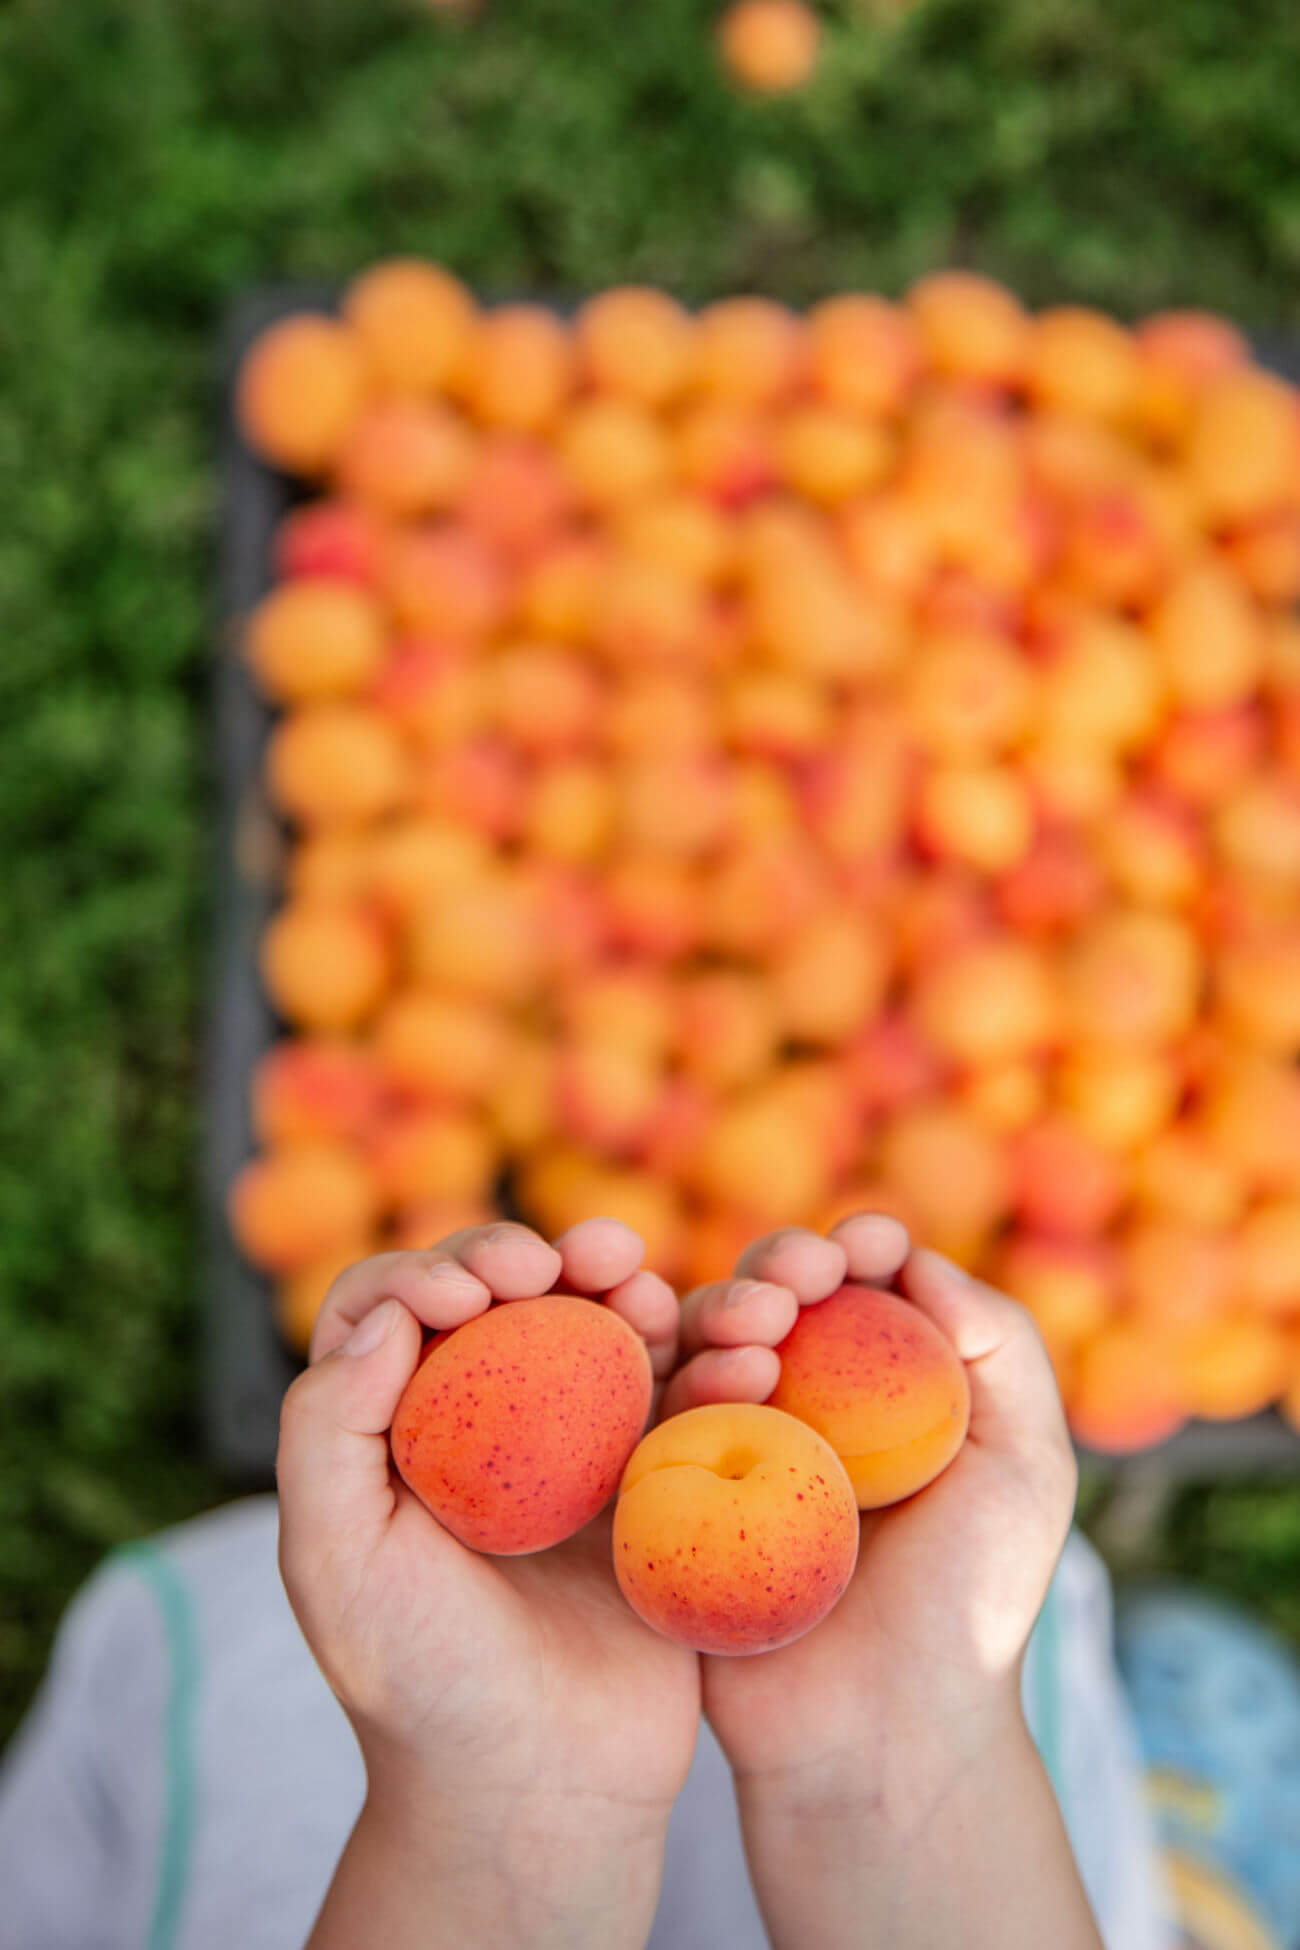 A child's hands hold three ripe apricots. Many freshly picked apricots can be seen in the background on the grass. 